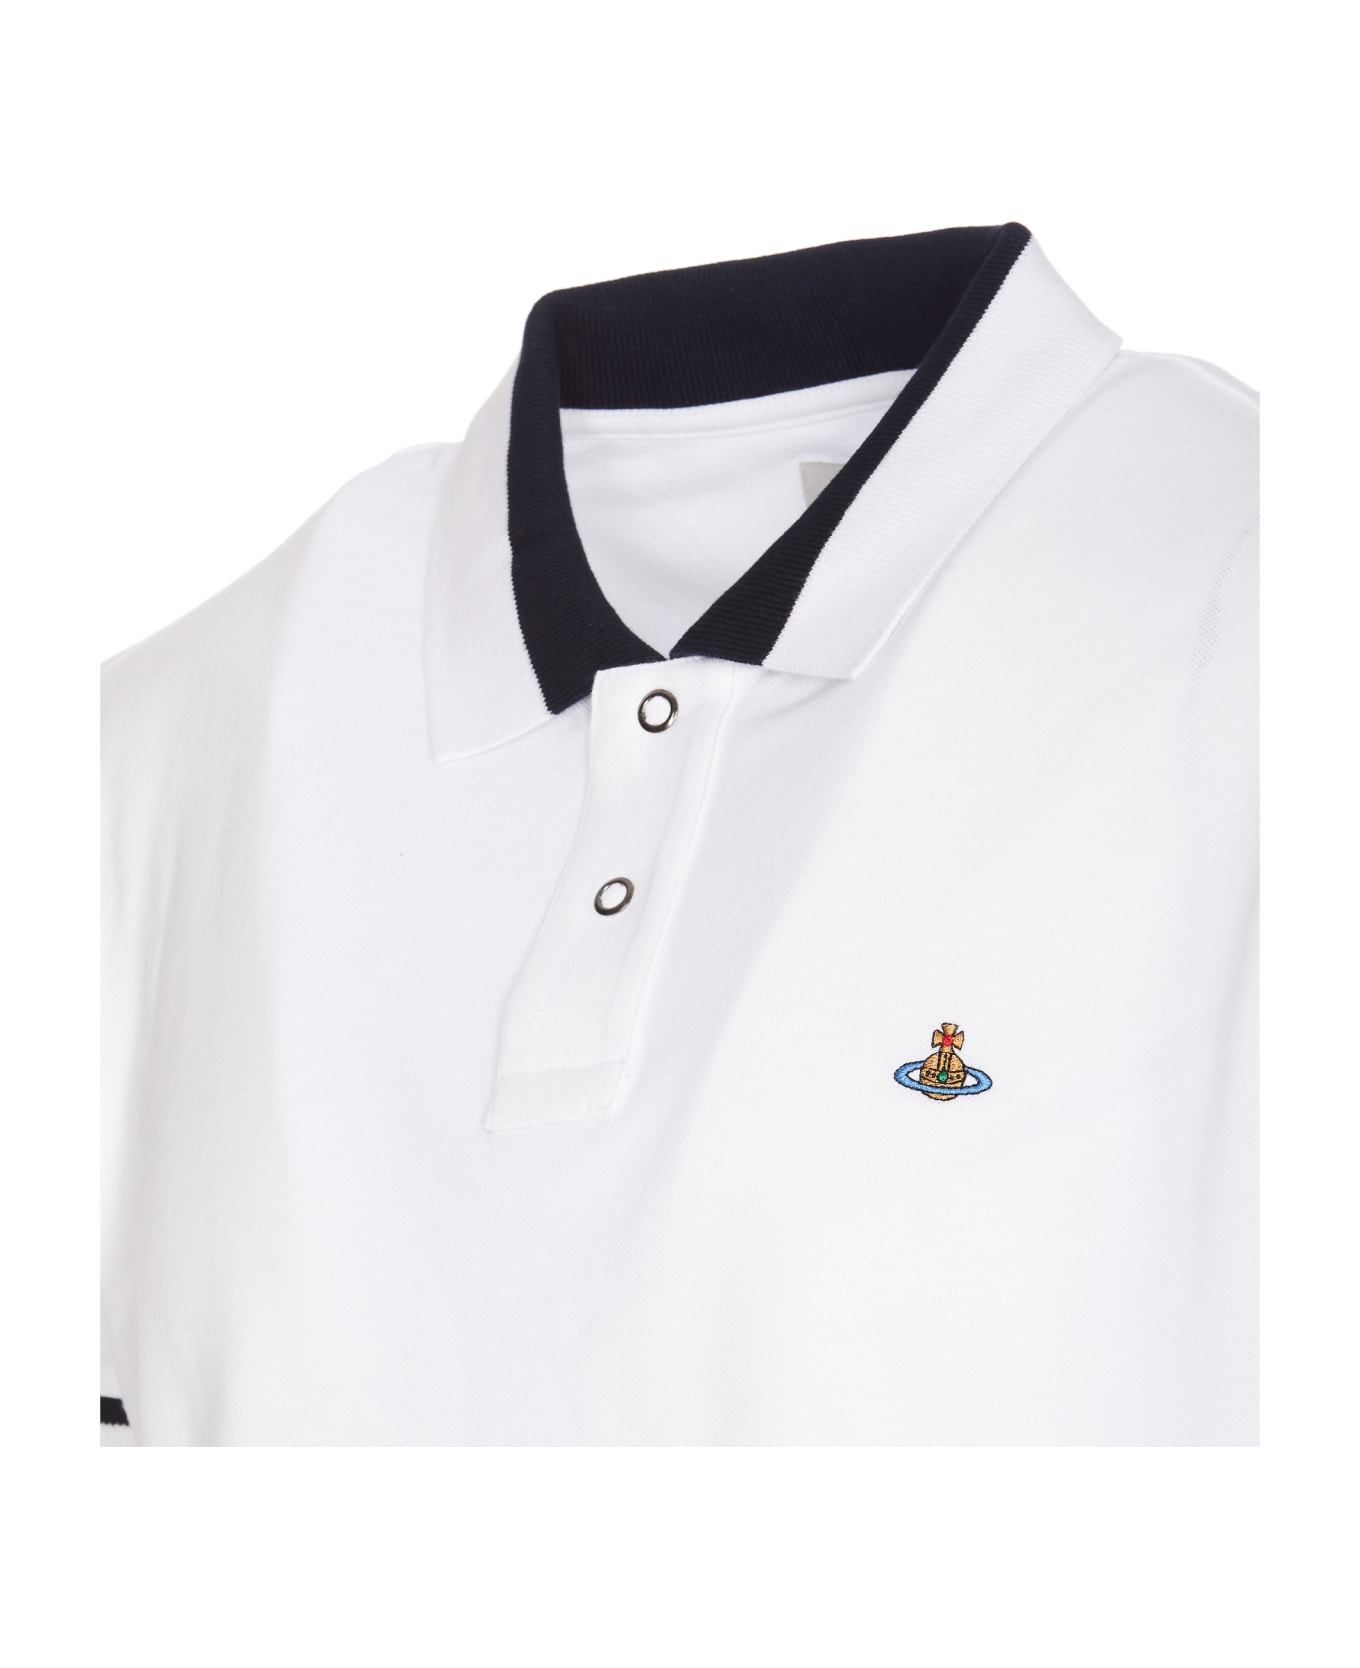 Vivienne Westwood Orb Polo - White